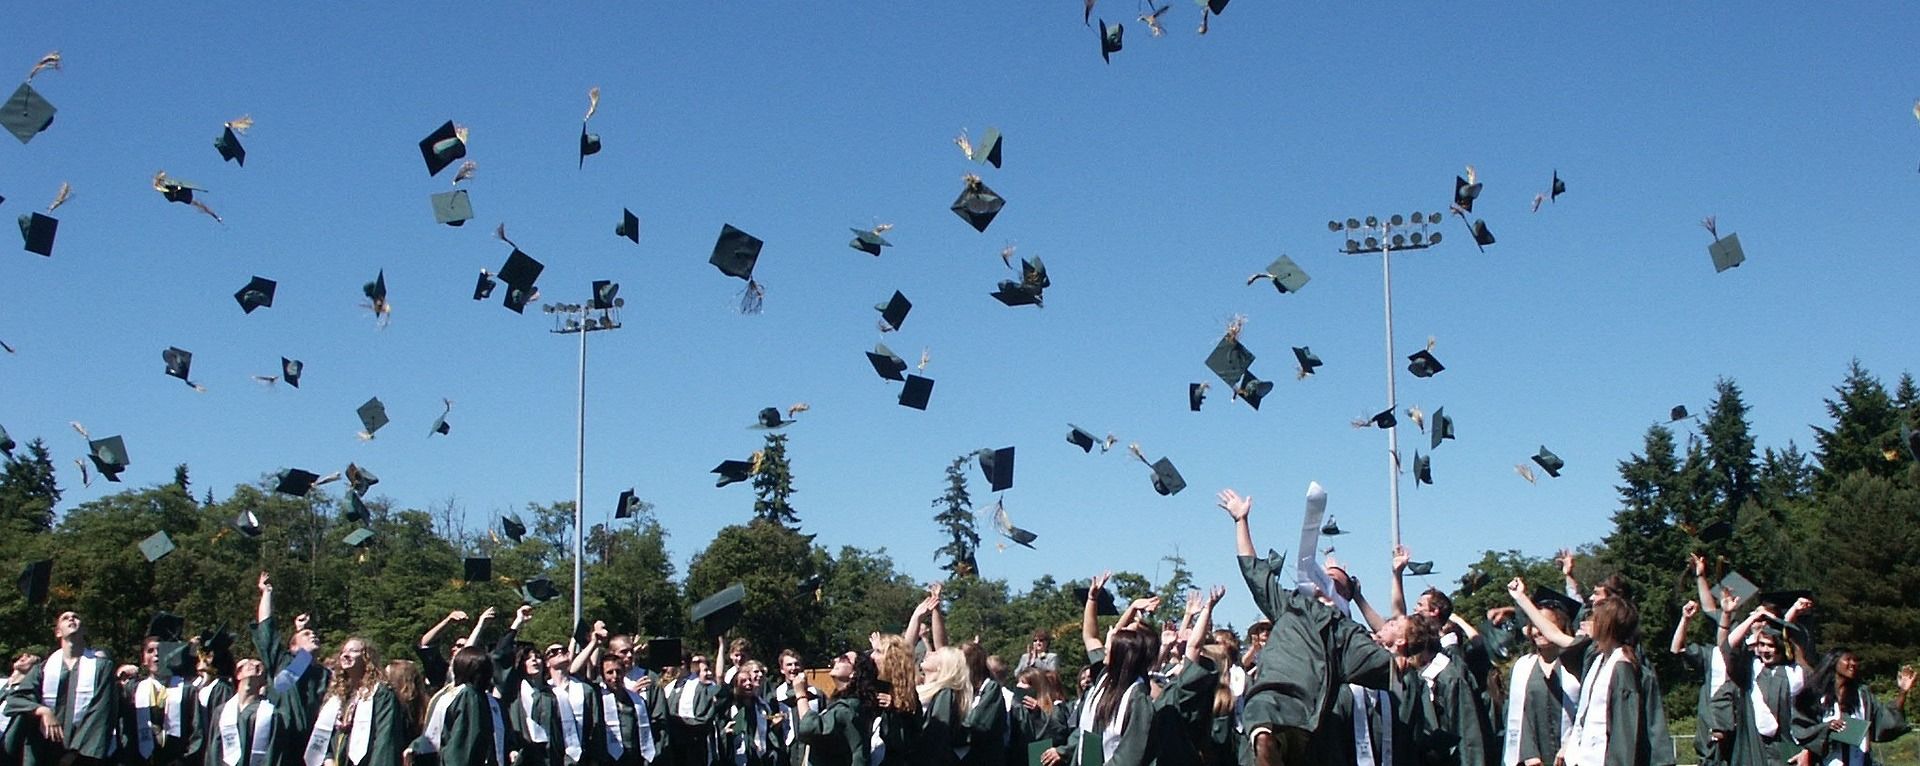 Newly graduated students throwing the their caps. Photo by greymatters via Pixabay